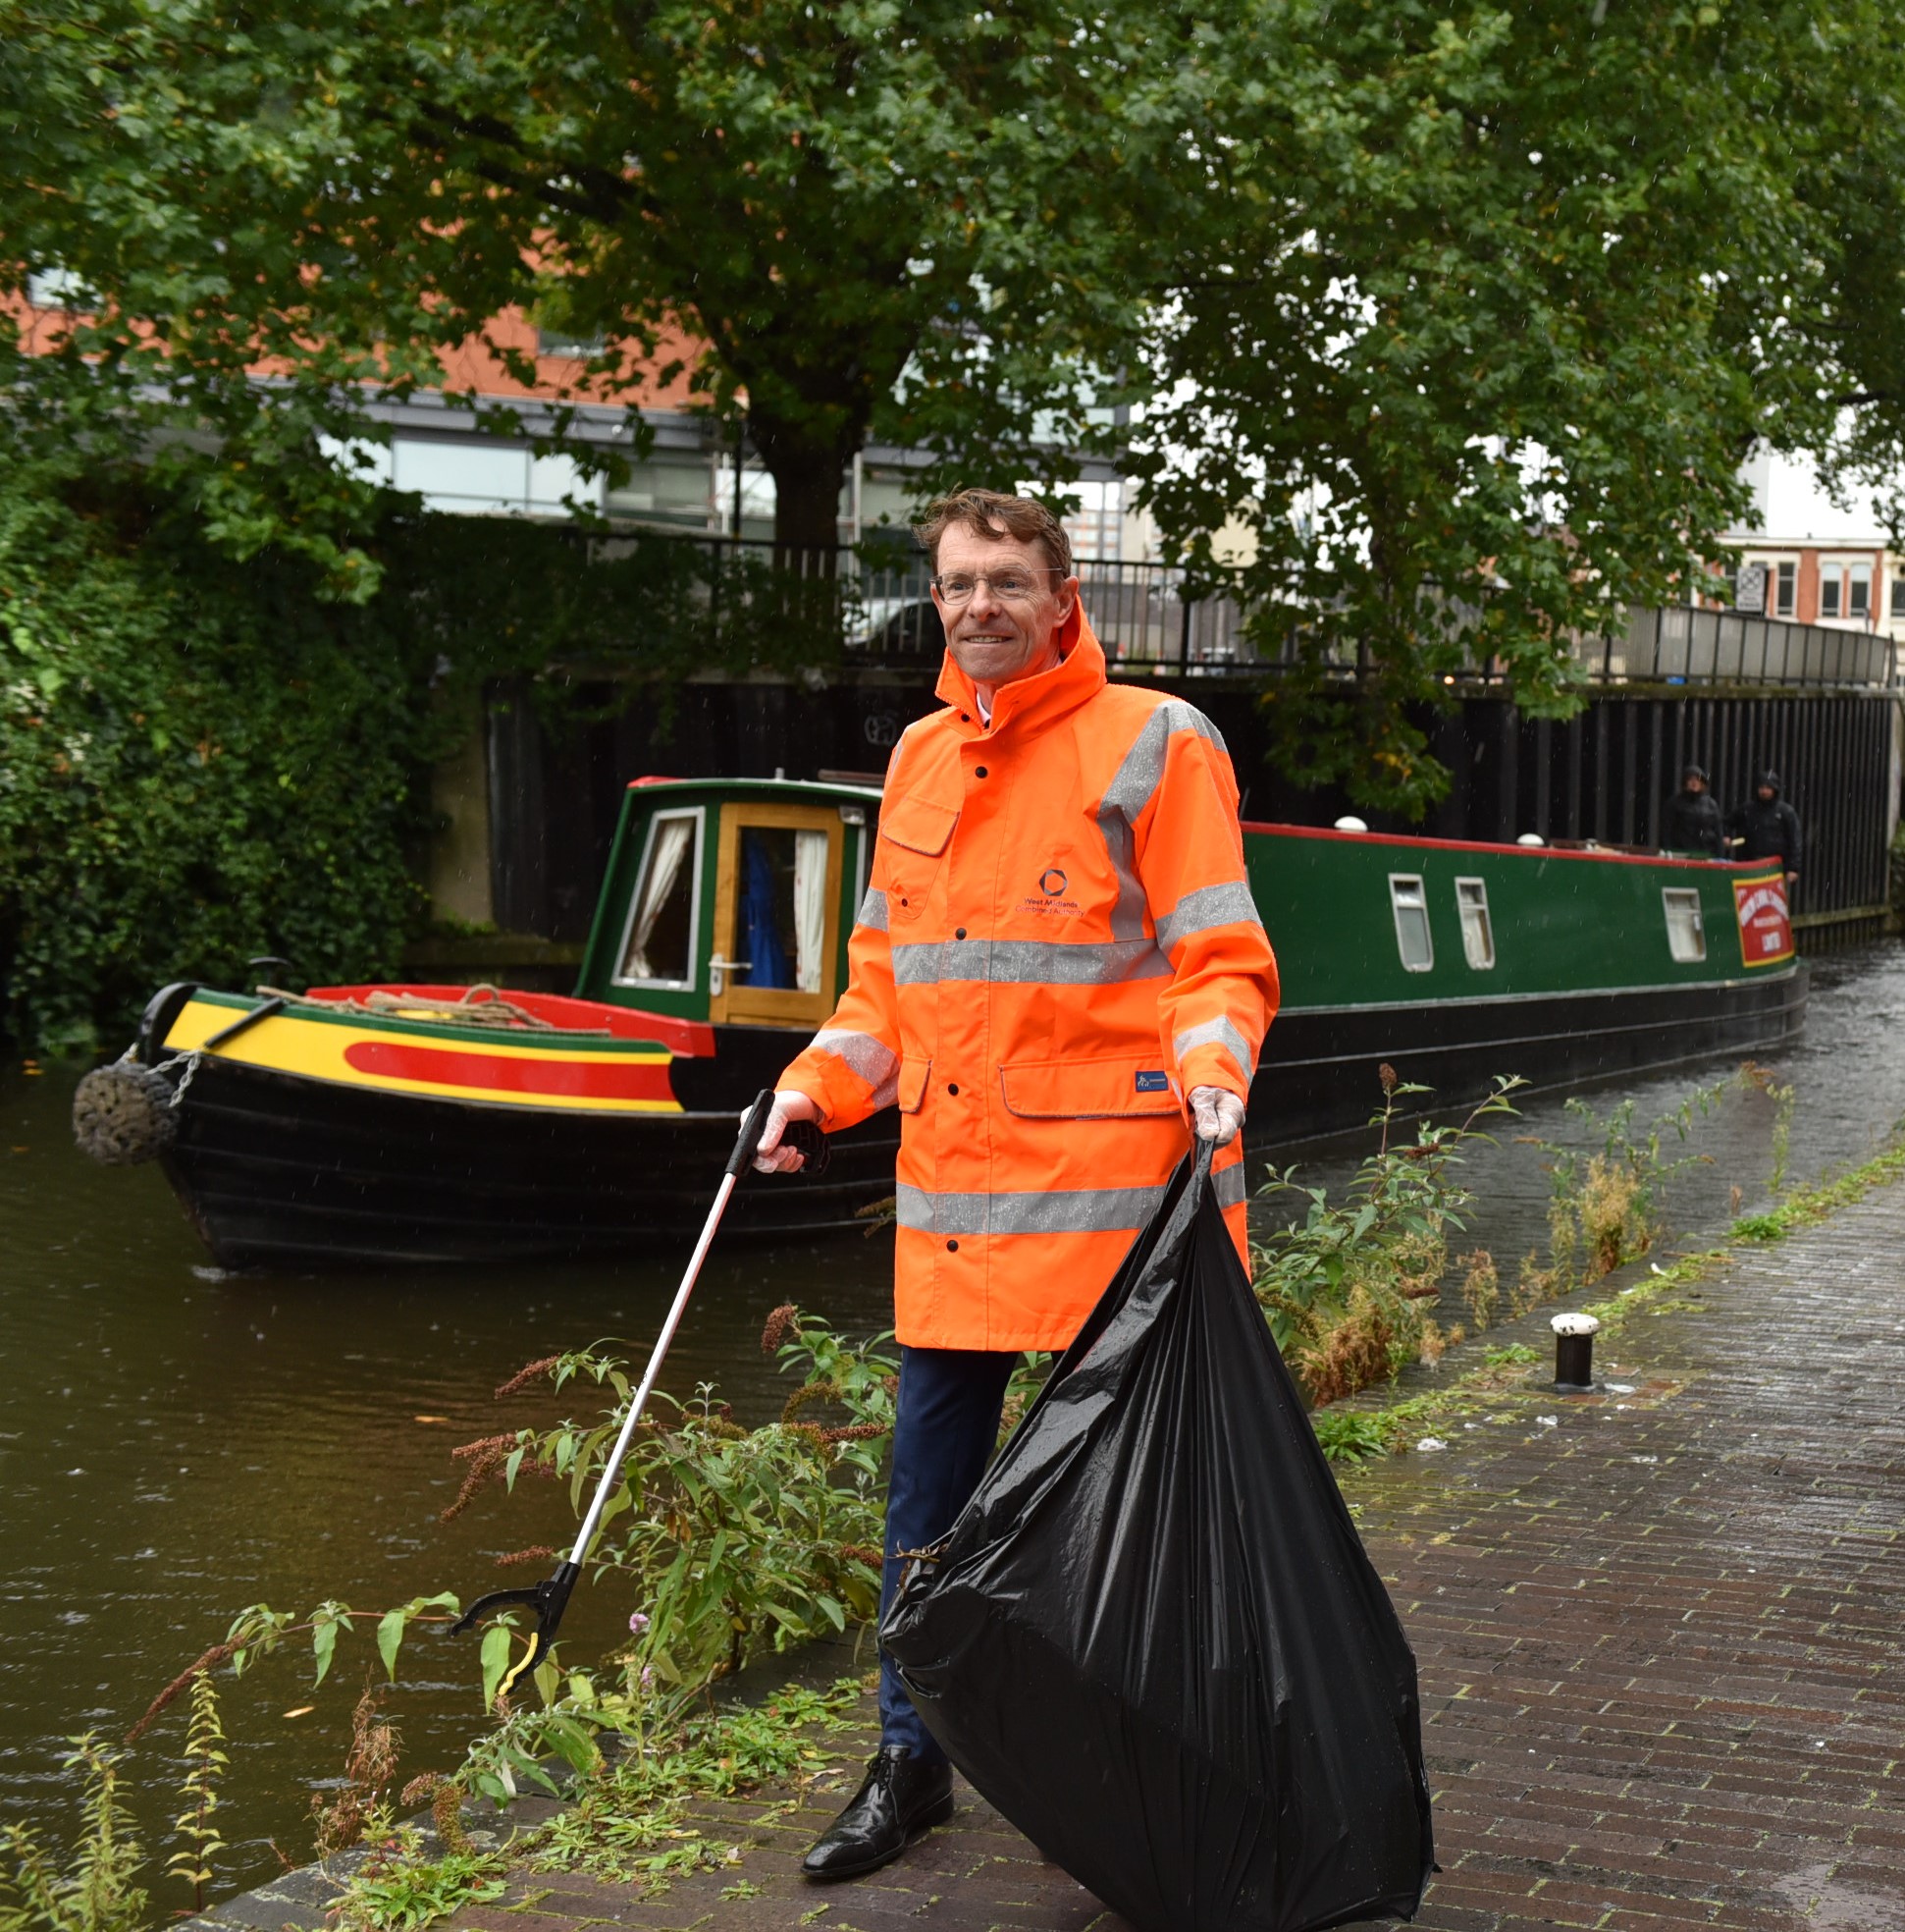 Andy Street, Mayor of the West Midlands litter picking